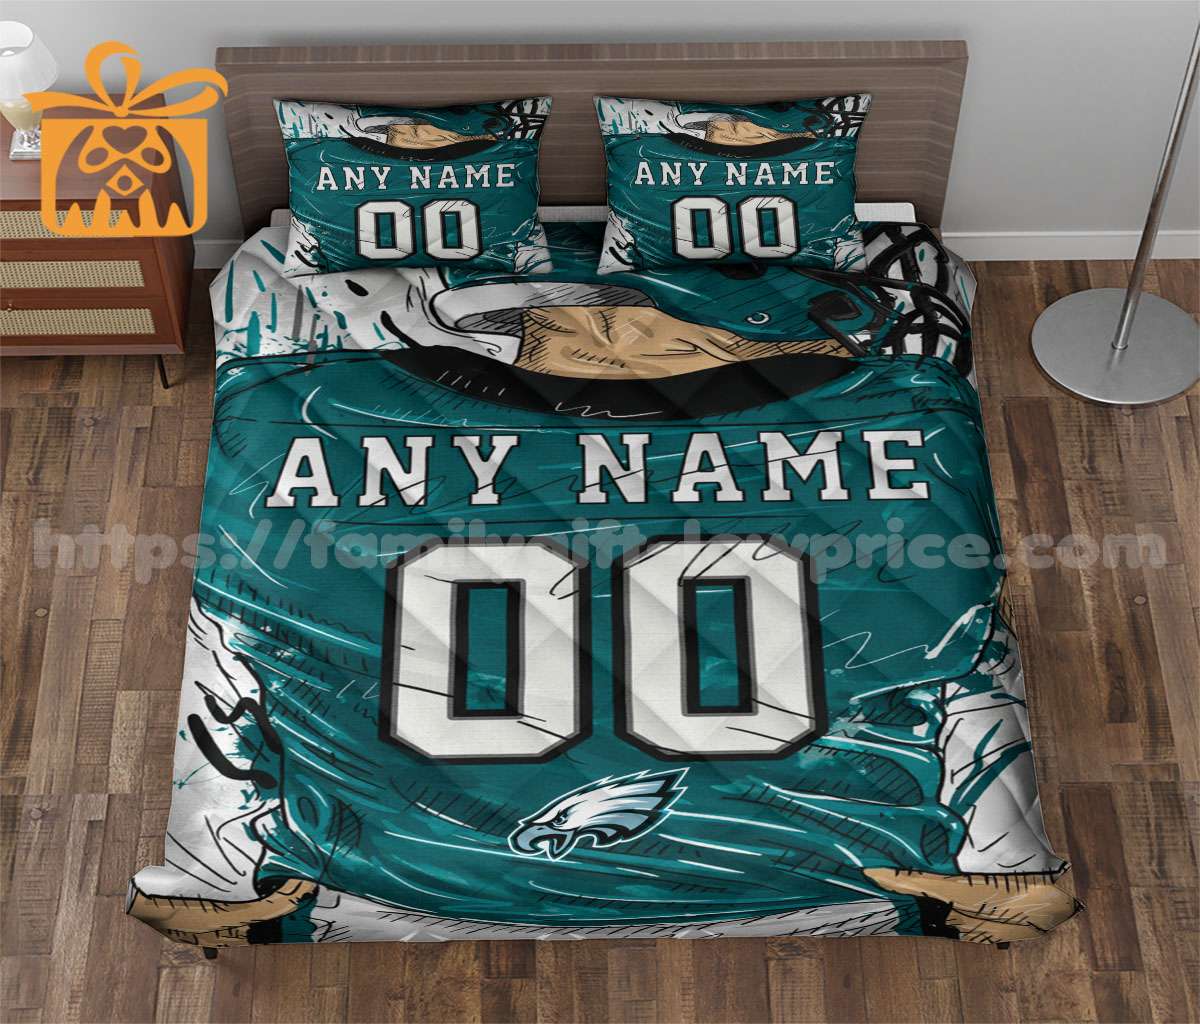 NFL Eagles Jersey Customized Quilt Bedding Set - Custom Any Name and Number for Men Women